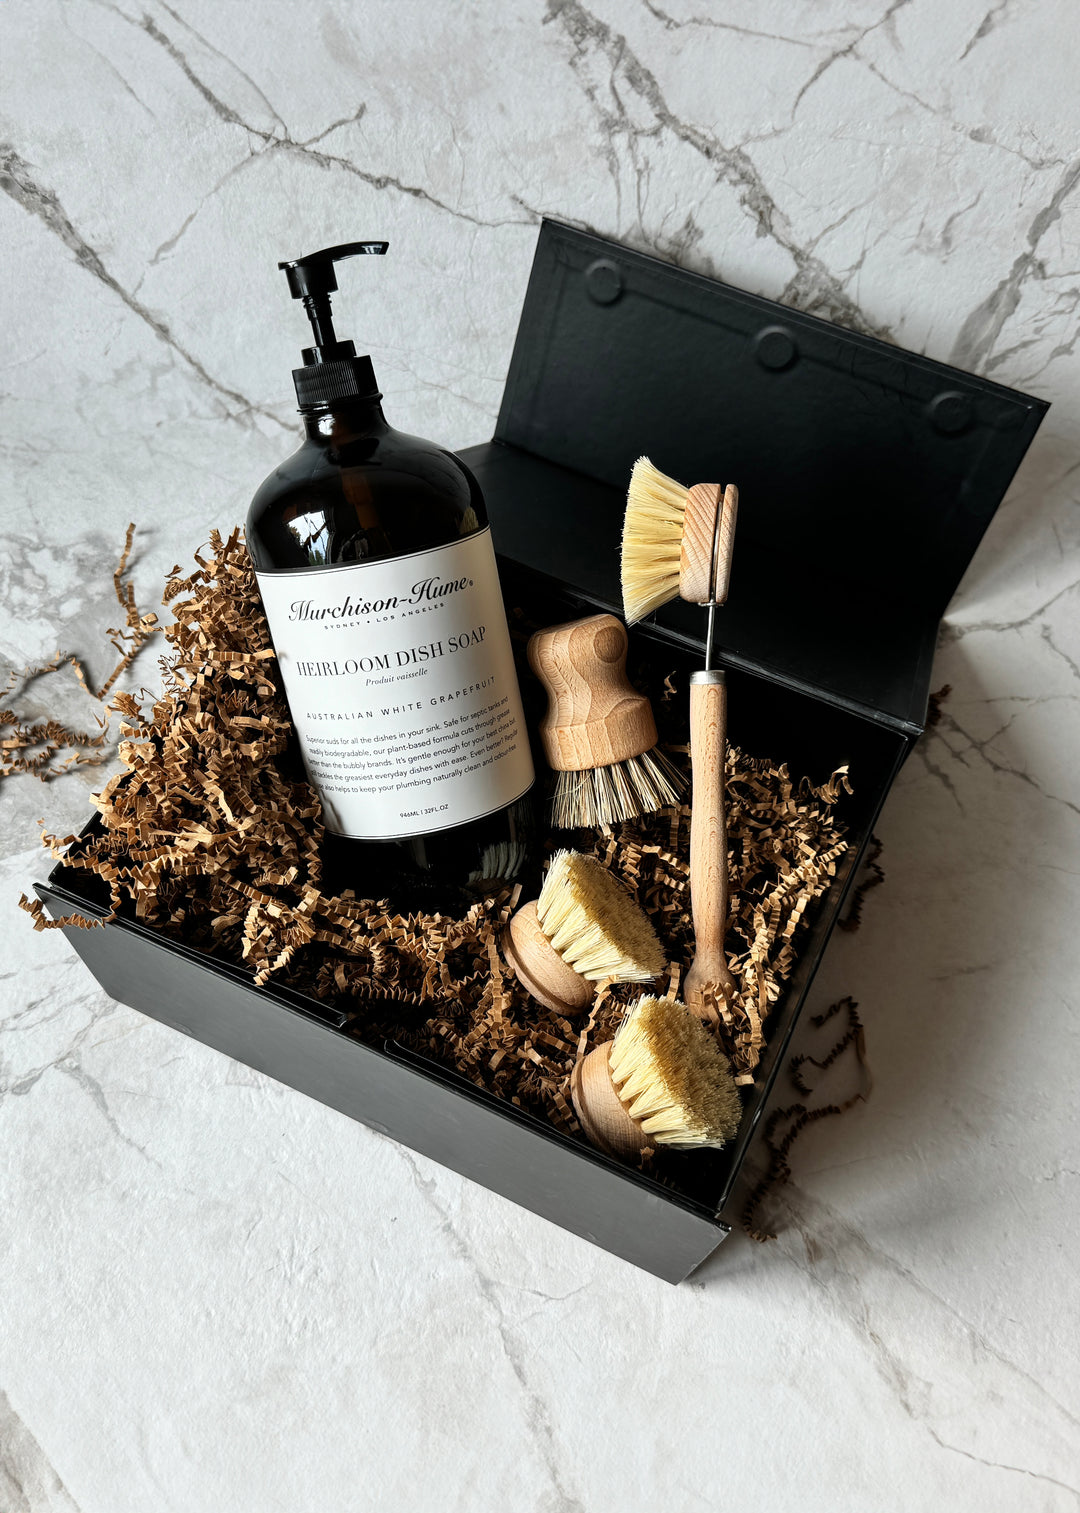 GET THE PERFECT GIFT: Heirloom Dish Soap Boxed Gift Set